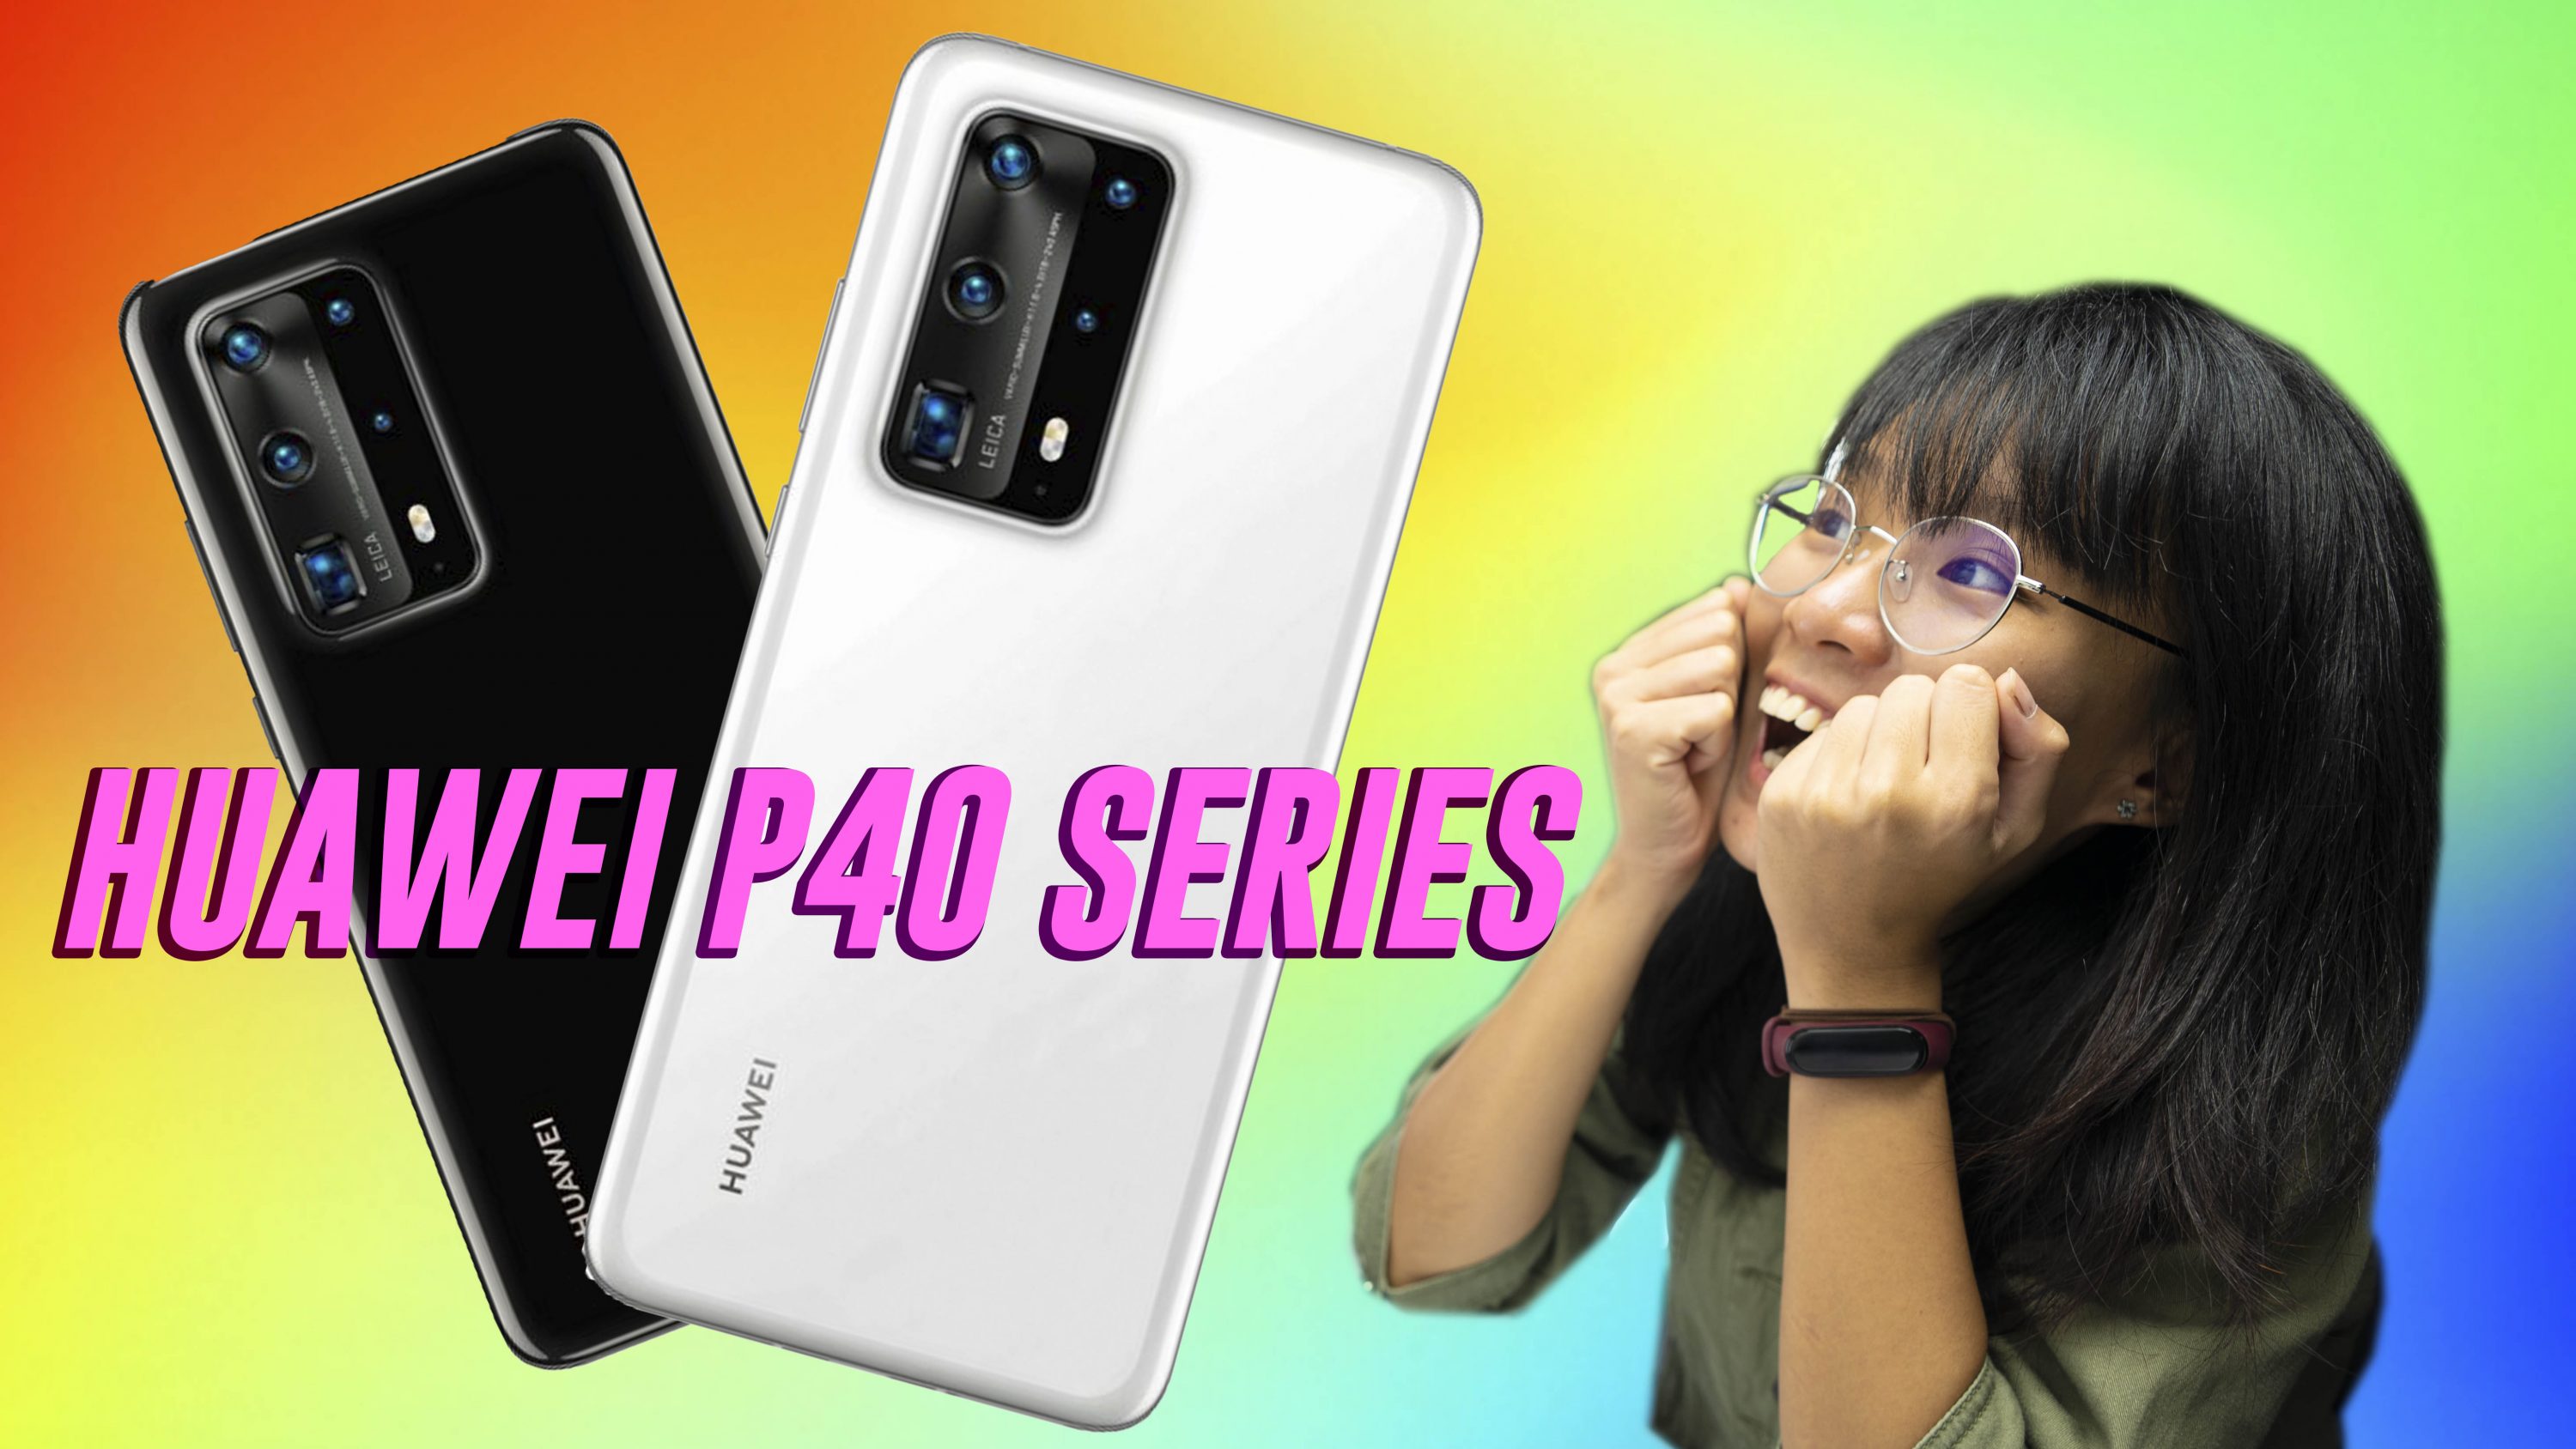 The Huawei P40 series is coming!  ICYMI #292